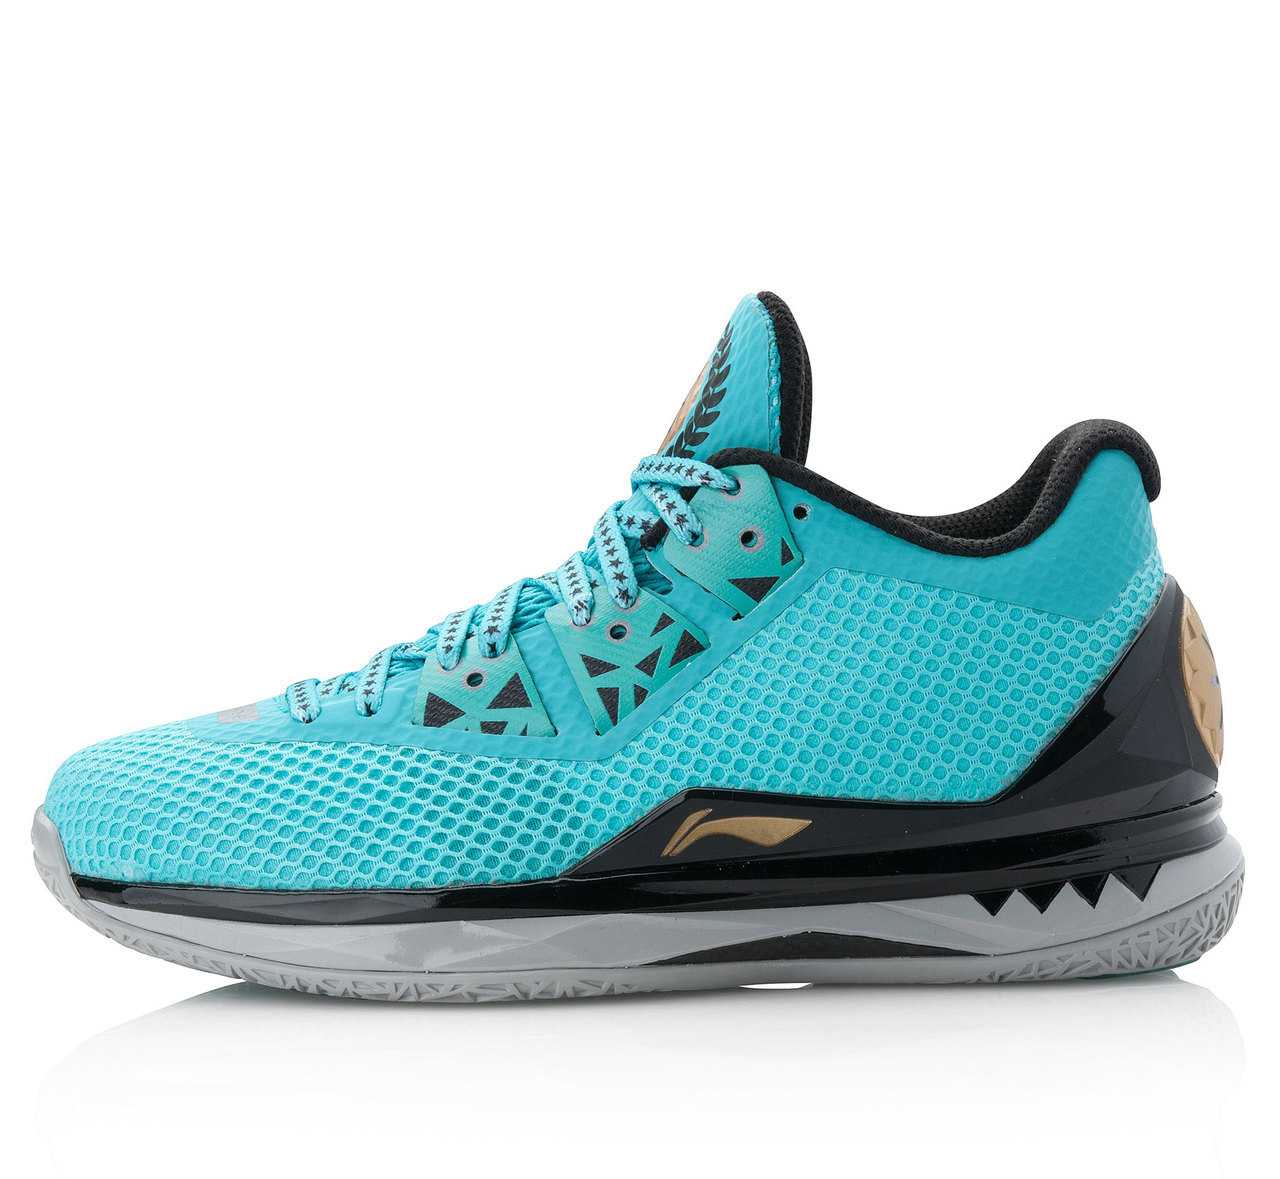 Li-Ning Way of Wade 4 Performance Review 7 - WearTesters